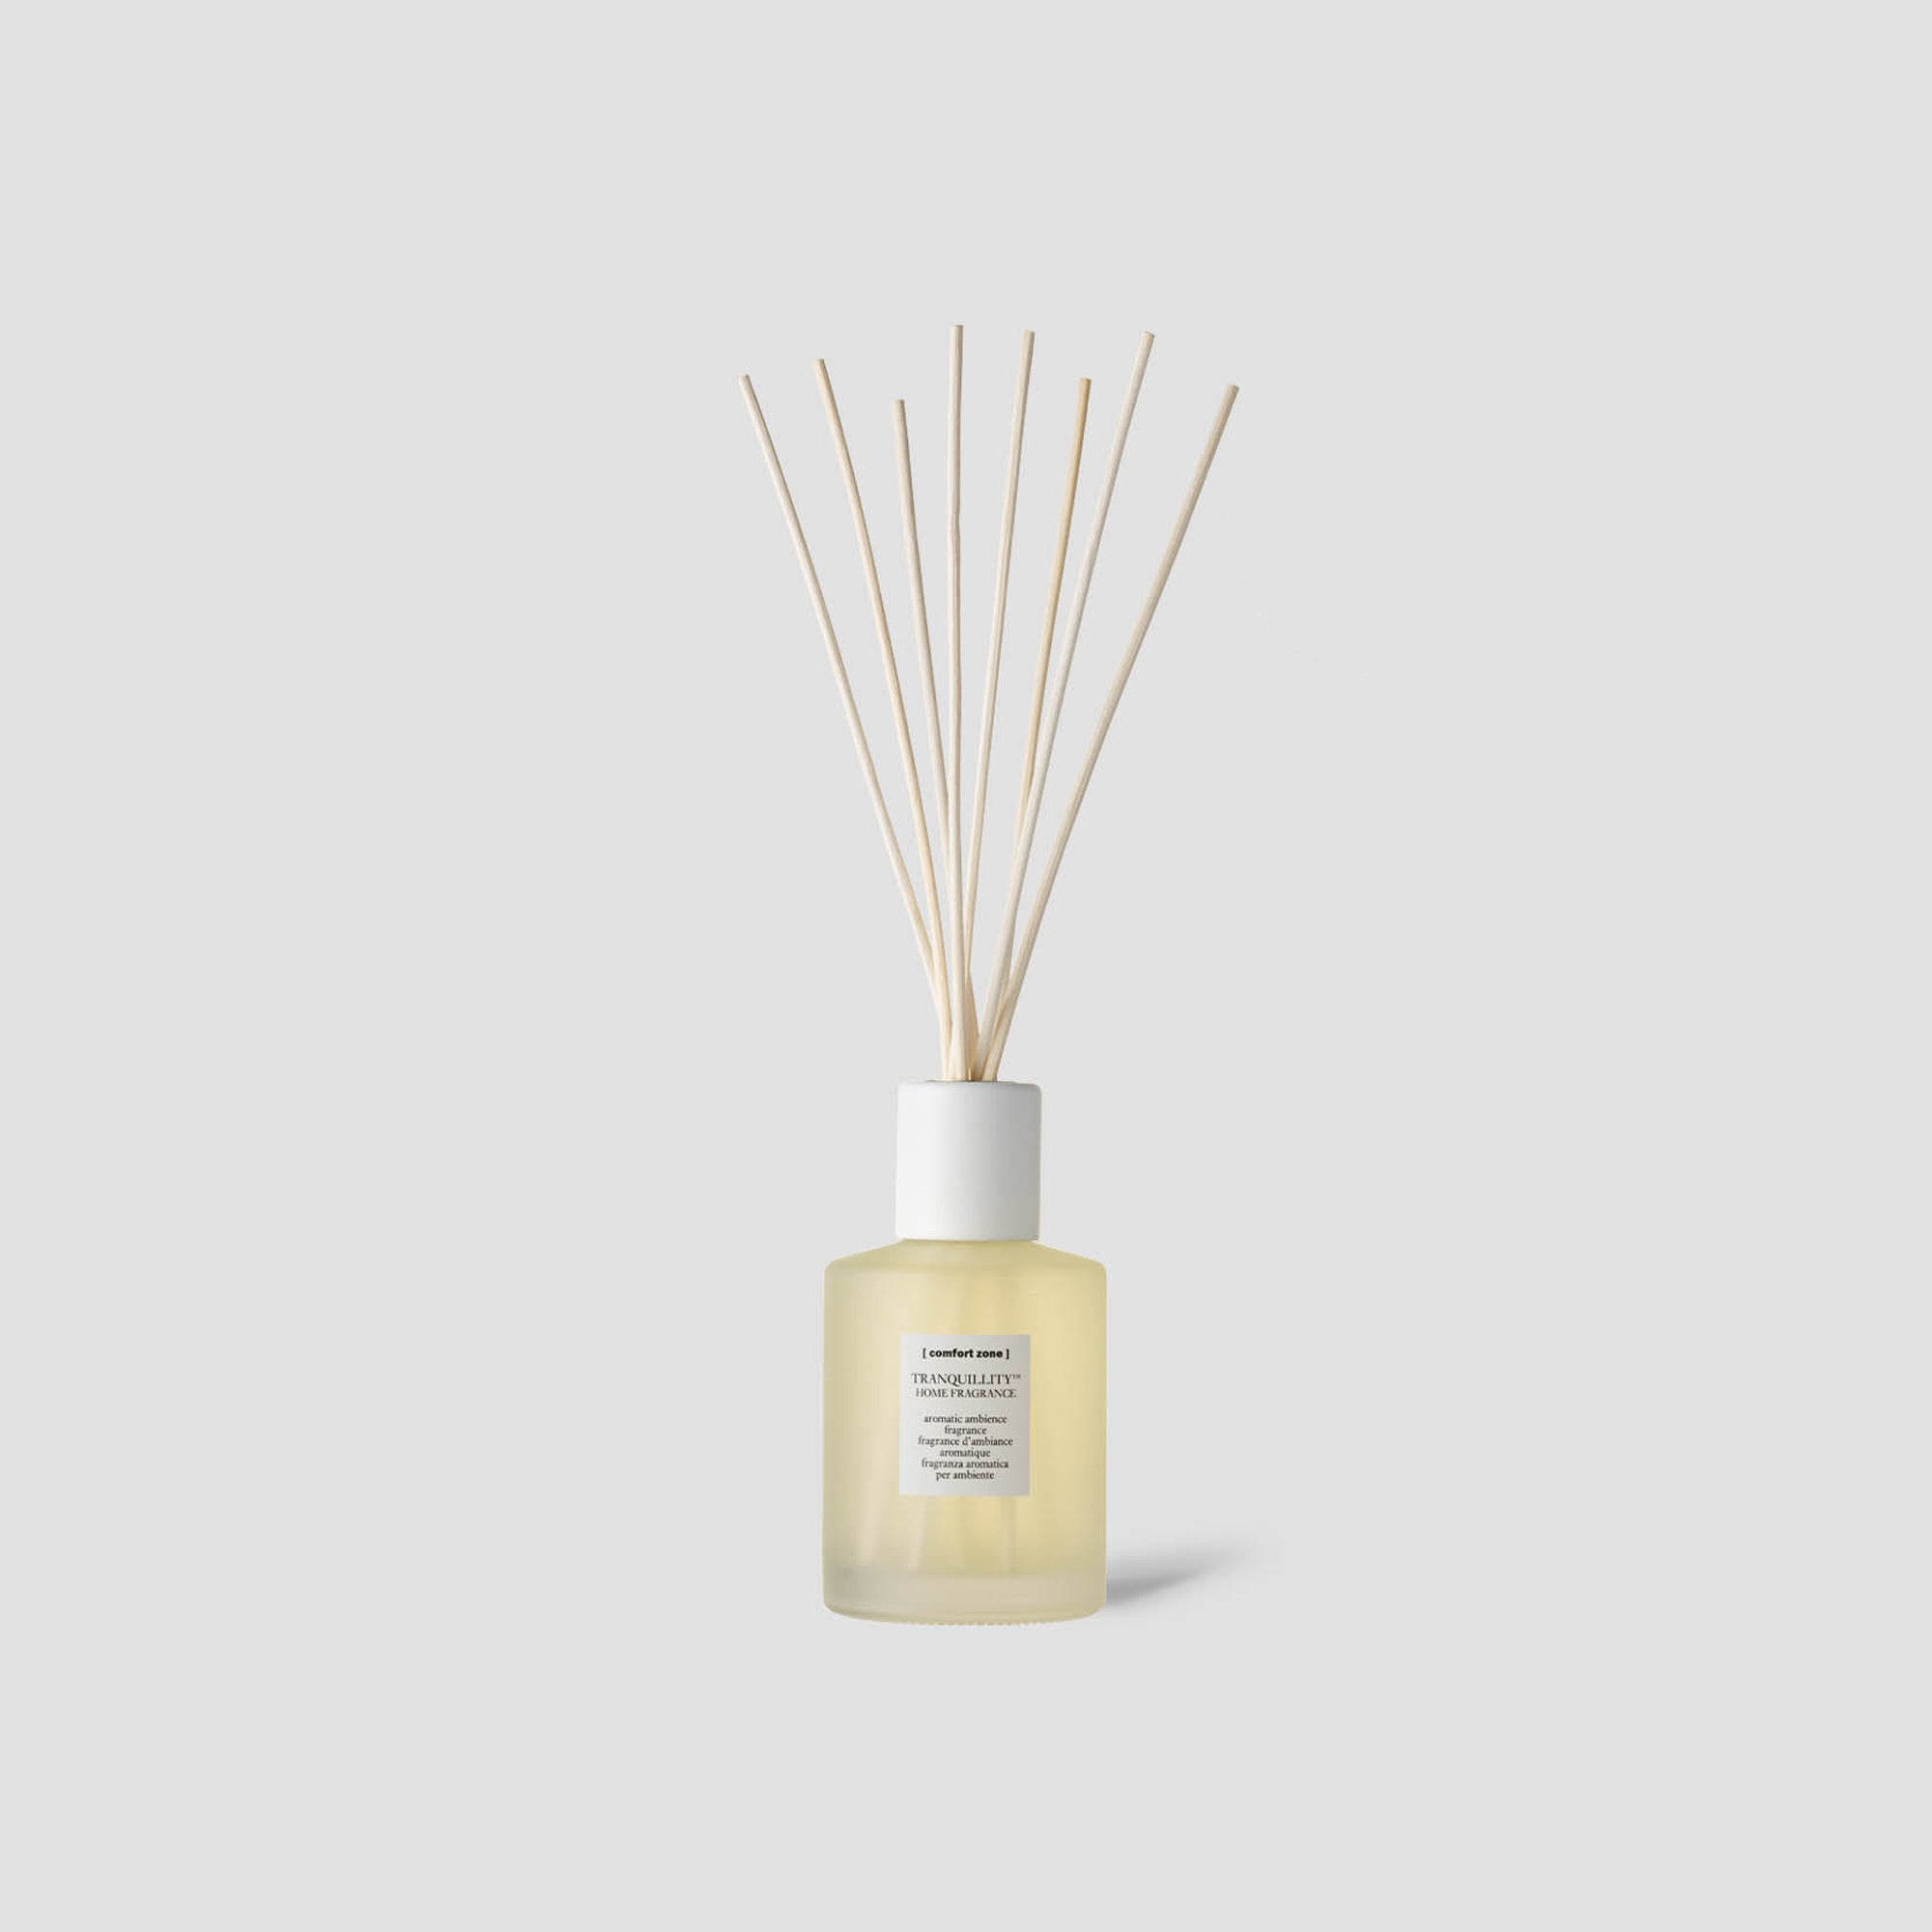 Tranquillity™ Home Fragrance (Room Fragrance Diffuser) - 500ml - [ com